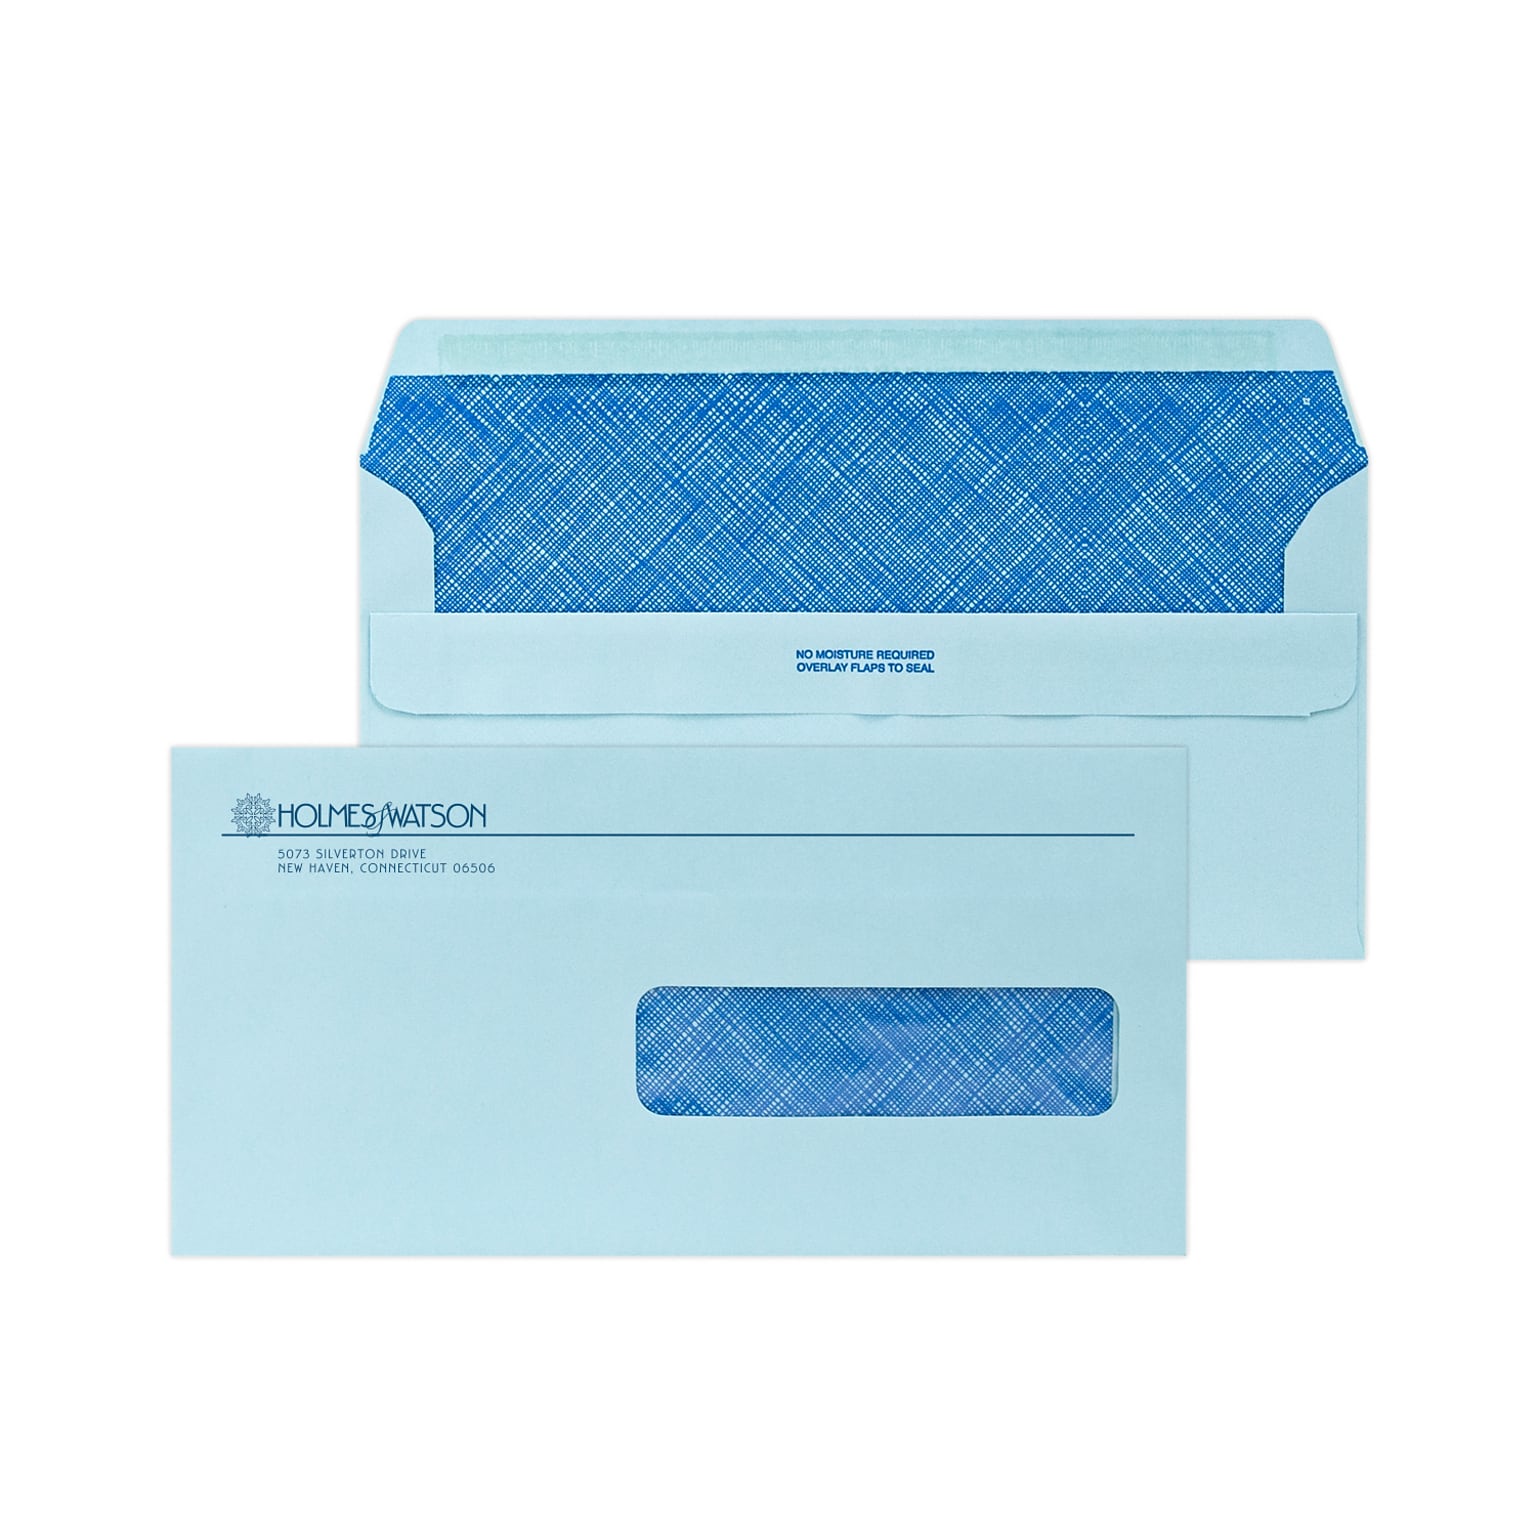 Custom 4-1/2 x 9 Insurance Claim Self Seal Right Window Envelopes with Security Tint, 24# Blue Wove, 1 Custom Ink, 250 / Pack